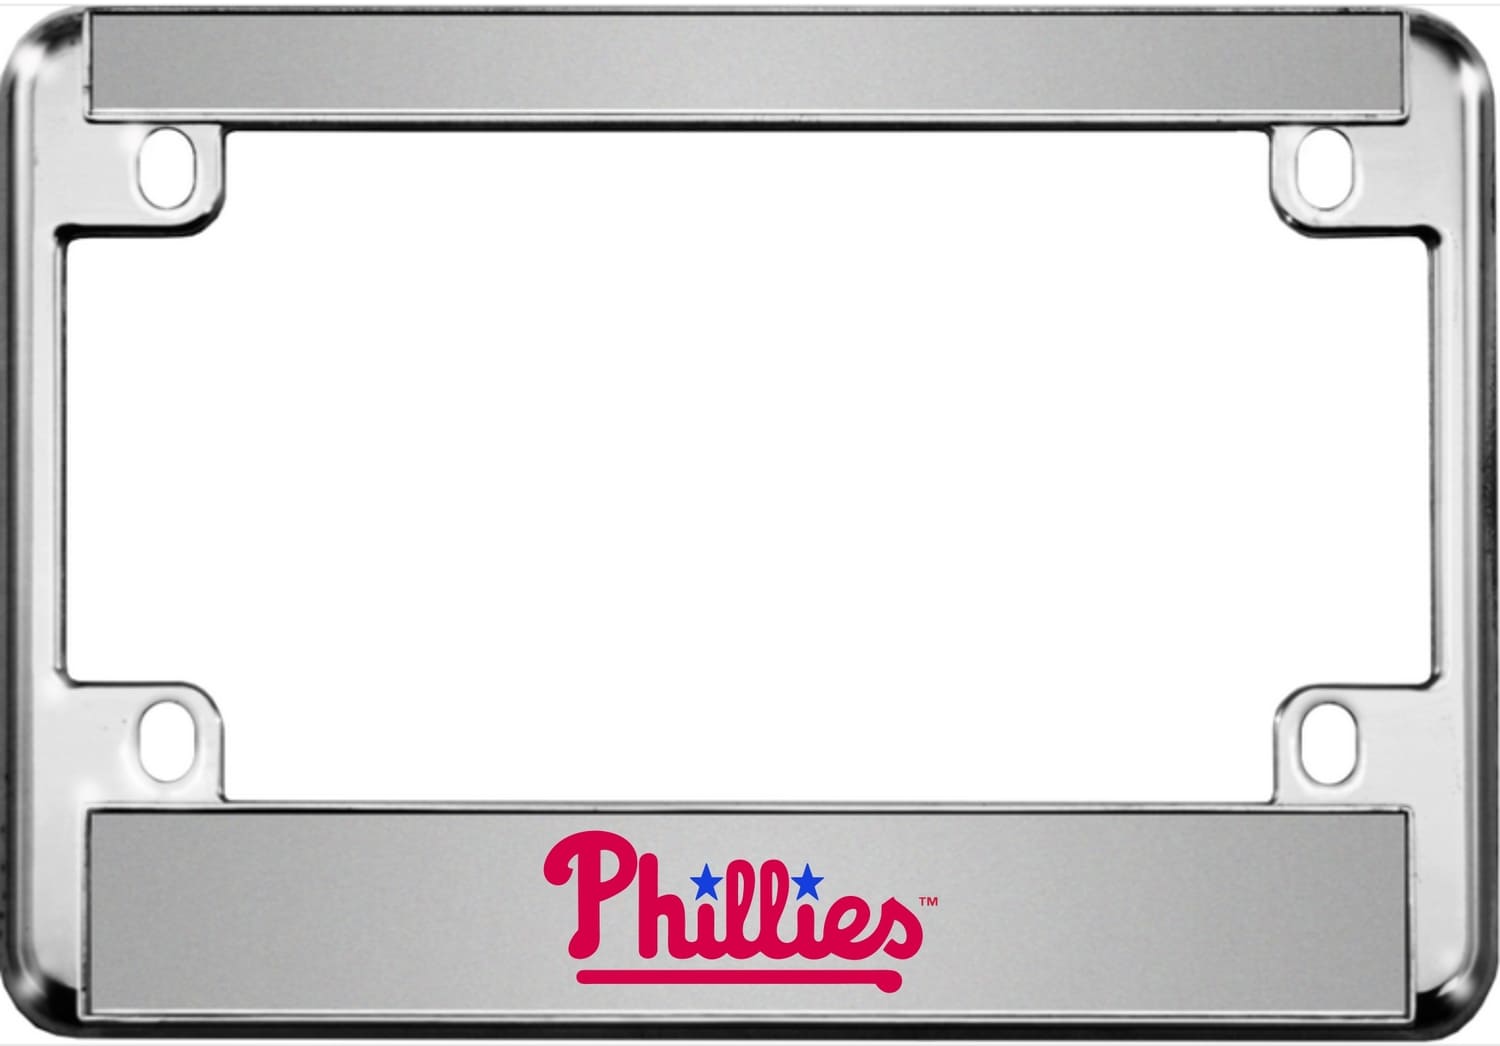 Motorcycle Metal License Plate Frame with Phillies Domed Design - Chrome